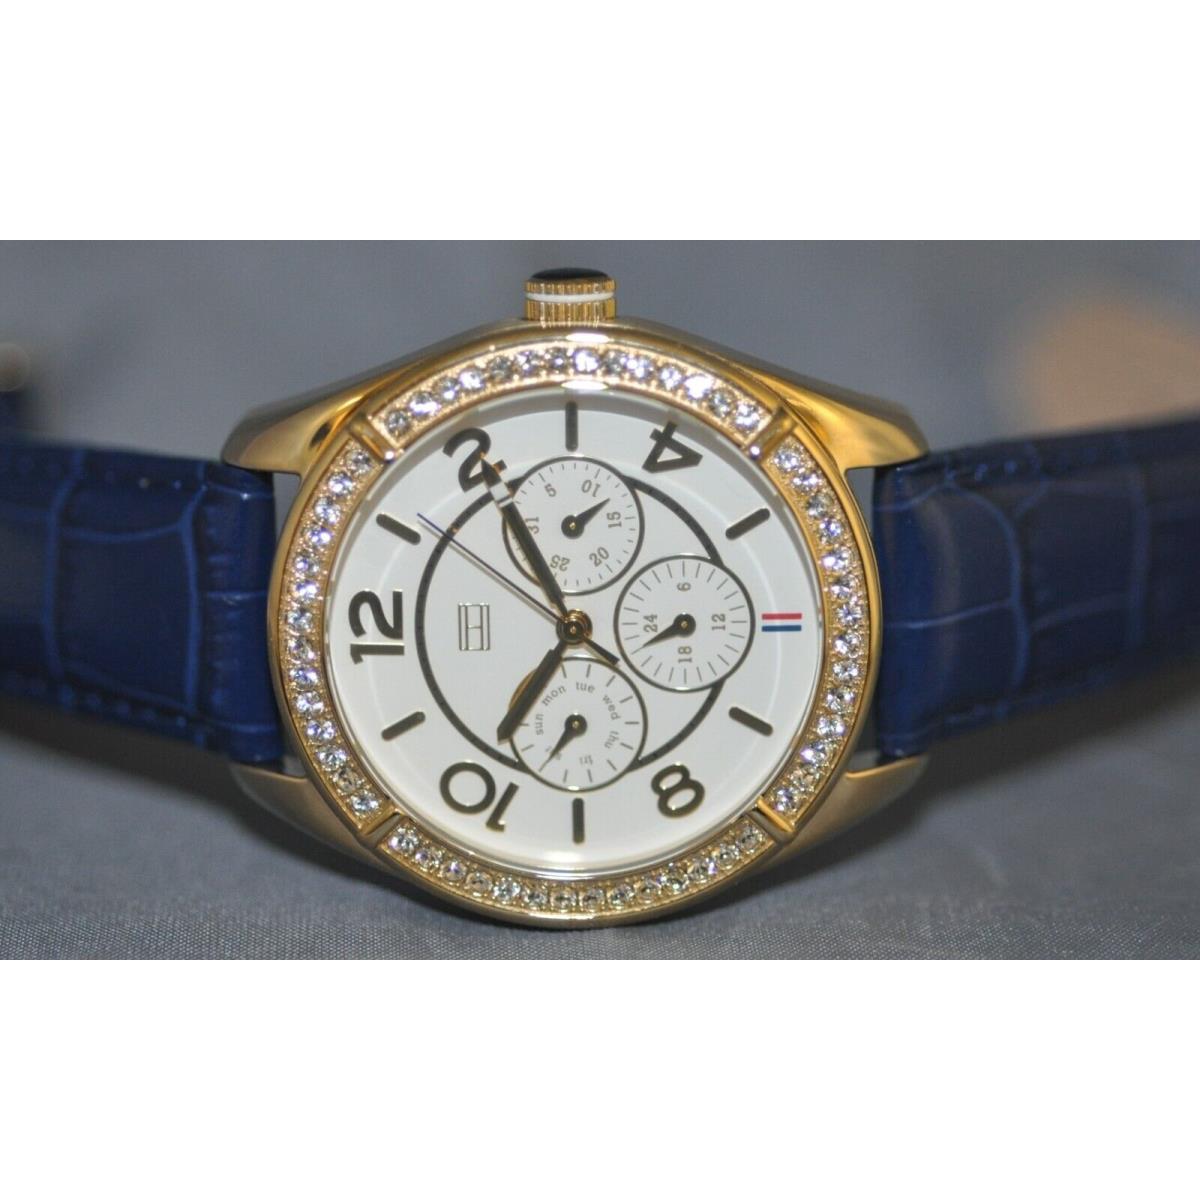 Tommy Hilfiger Ladies White Dial Blue Leather Watch 1781270 - Dial: White, Band: Blue, Bezel: Gold